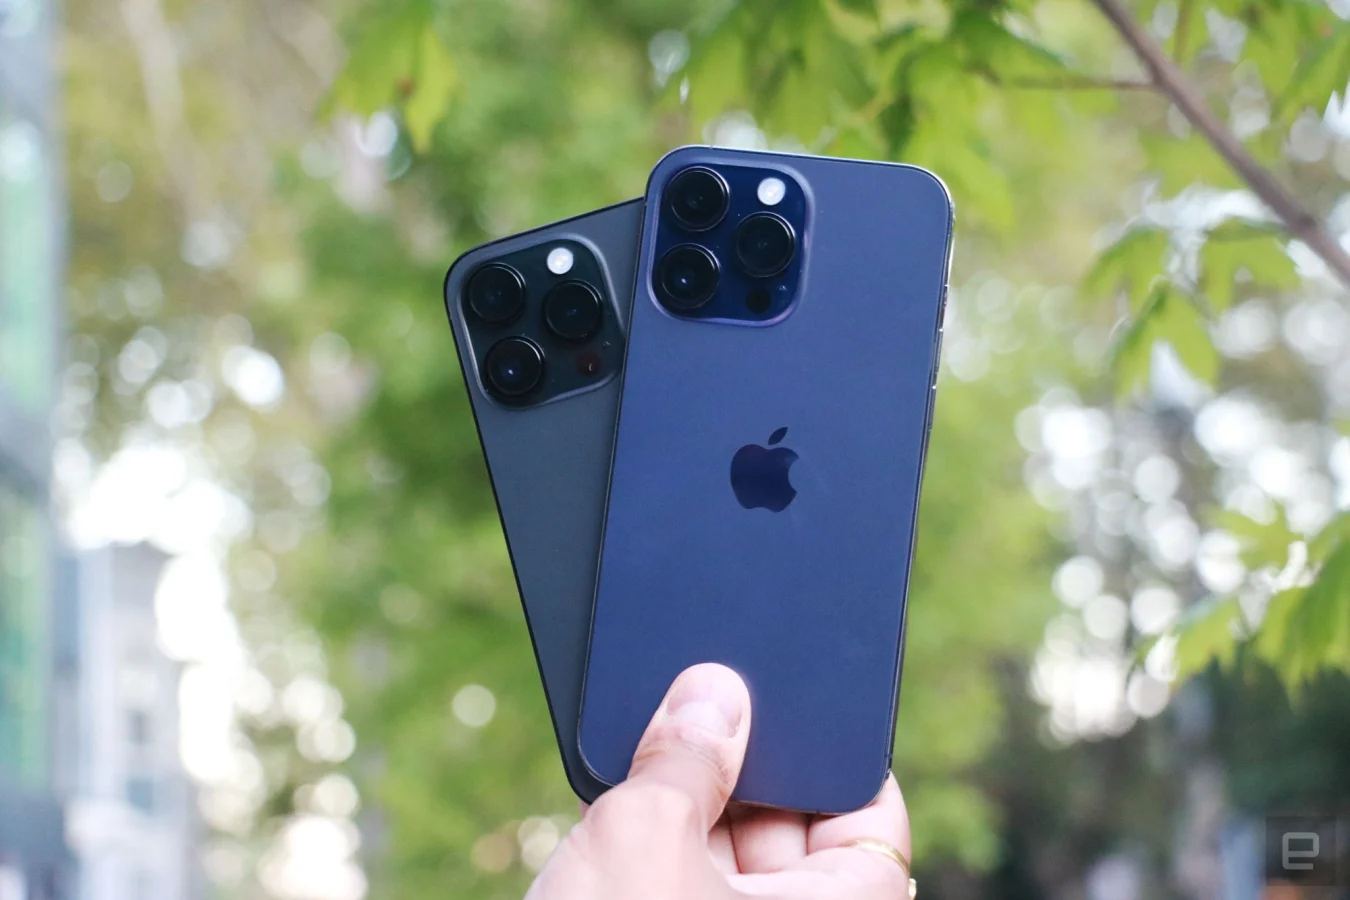 The purple iPhone 14 Pro Max and the black iPhone 14 Pro held on top of each other in one hand, slightly fanned out so you can see the triple rear cameras of each handset.